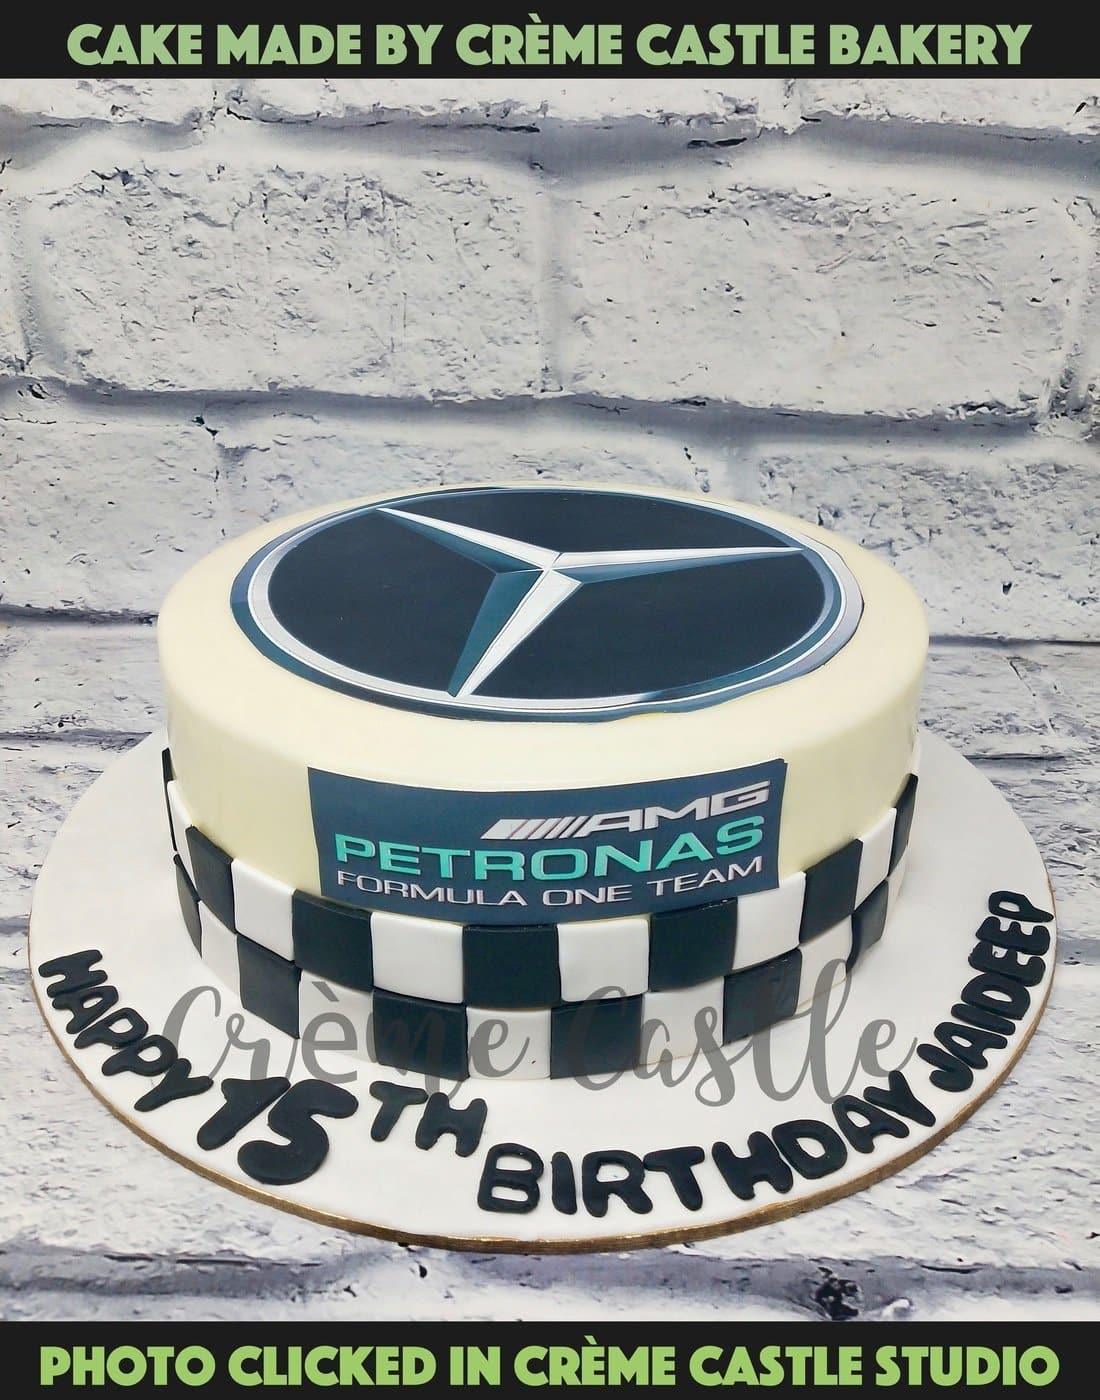 Mercedes benz cake – Page 2 – Pao's cakes